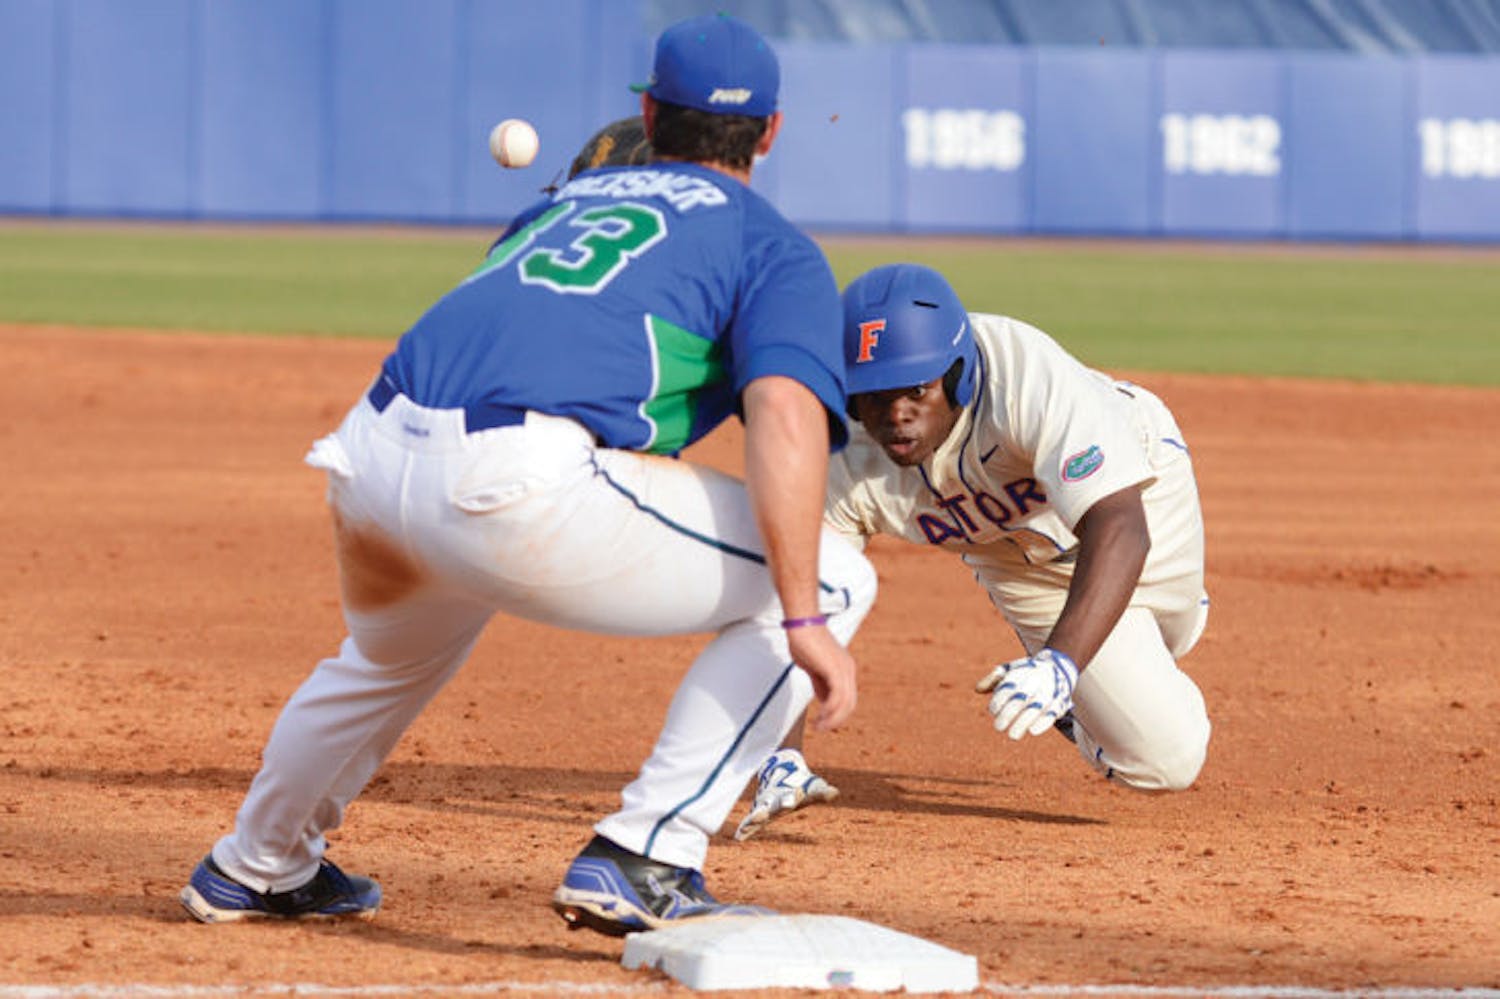 Josh Tobias dives back to first base to avoid being picked off during Florida’s 8-3 loss against Florida Gulf Coast on Feb. 23, 2013. Tobias suffered a broken toe last year but is healthy to start the 2014 season.